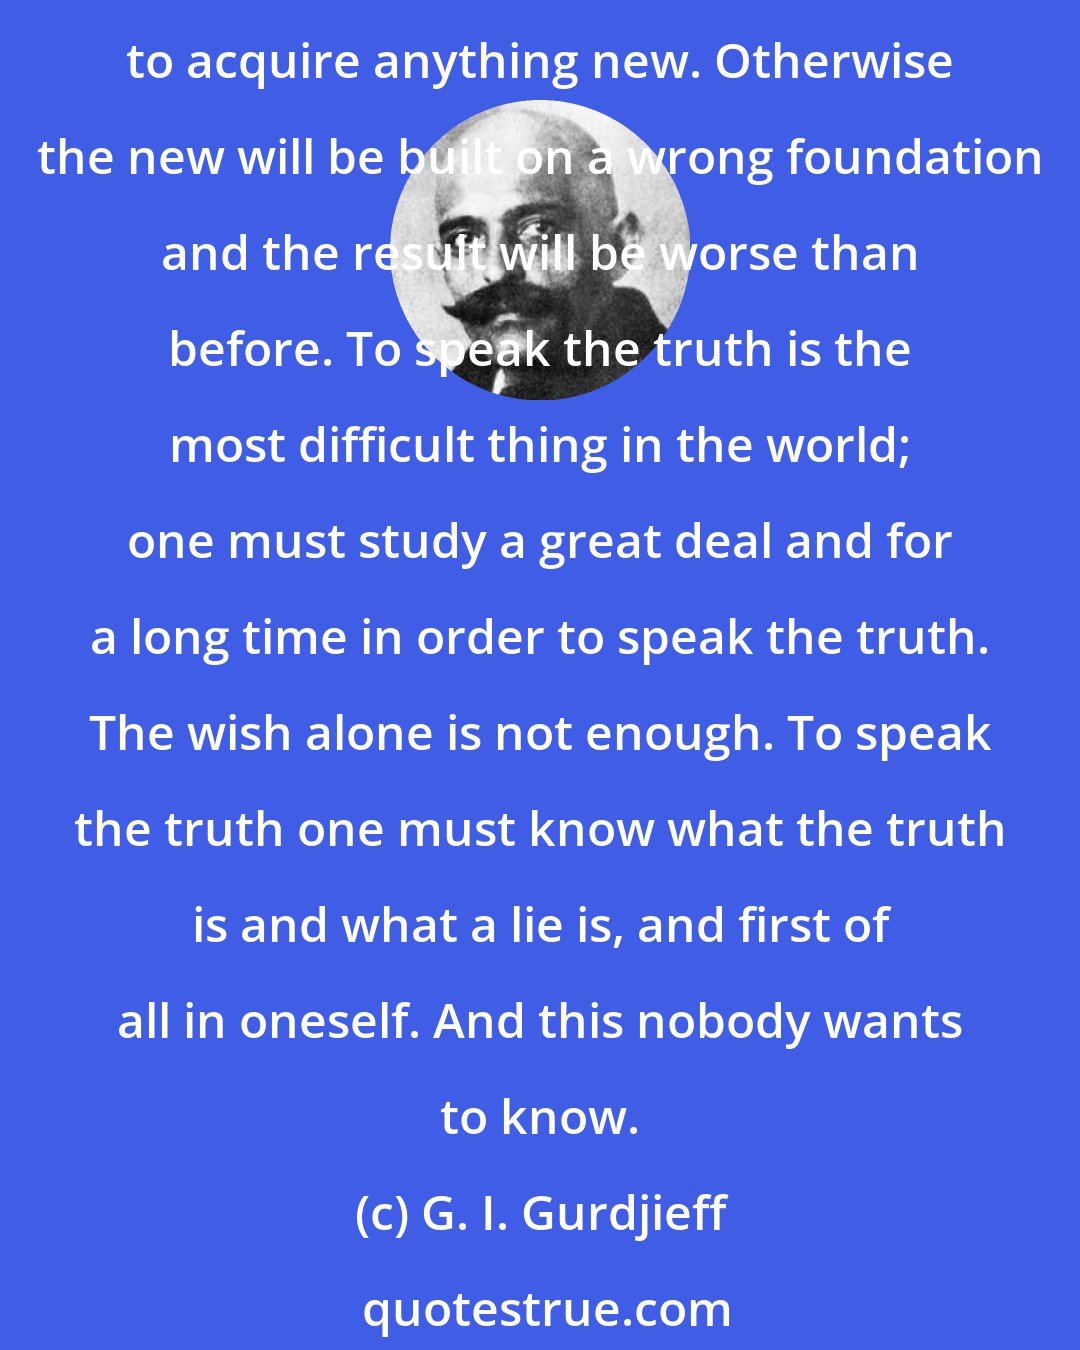 G. I. Gurdjieff: A man must first of all understand certain things. He has thousands of false ideas and false conceptions, chiefly about himself, and he must get rid of some of them before beginning to acquire anything new. Otherwise the new will be built on a wrong foundation and the result will be worse than before. To speak the truth is the most difficult thing in the world; one must study a great deal and for a long time in order to speak the truth. The wish alone is not enough. To speak the truth one must know what the truth is and what a lie is, and first of all in oneself. And this nobody wants to know.